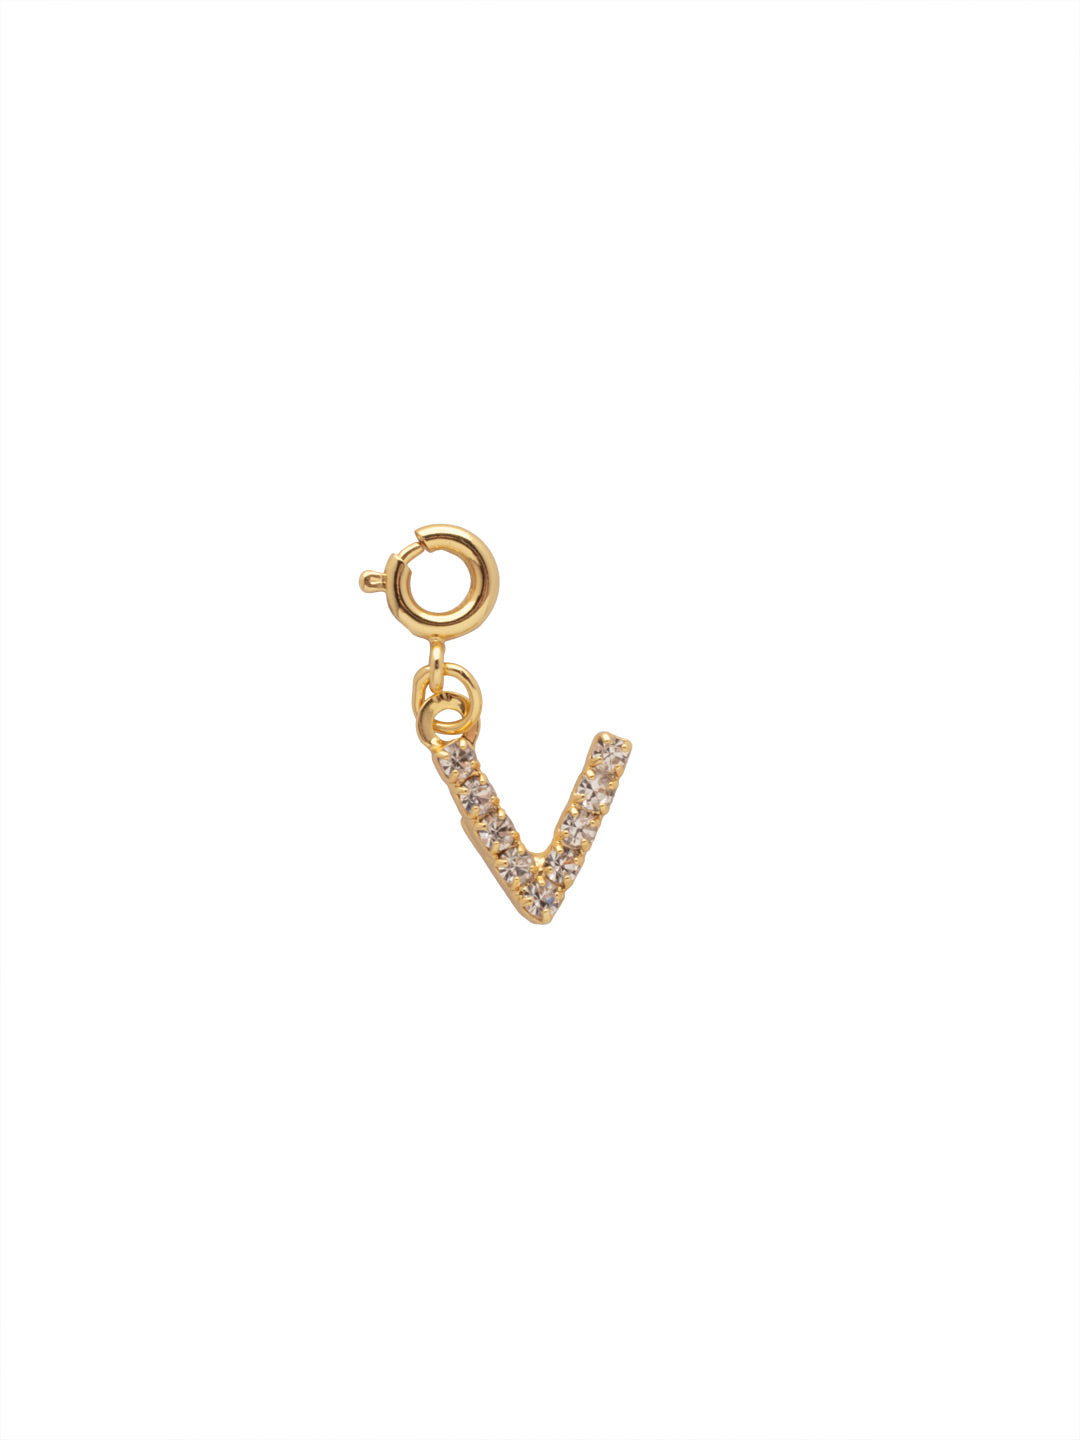 "V" Initial Charm - CFB22BGCRY - <p>The Initial Charm features a metal letter embellished with small round crystals and a small spring ring clasp. From Sorrelli's Crystal collection in our Bright Gold-tone finish.</p>